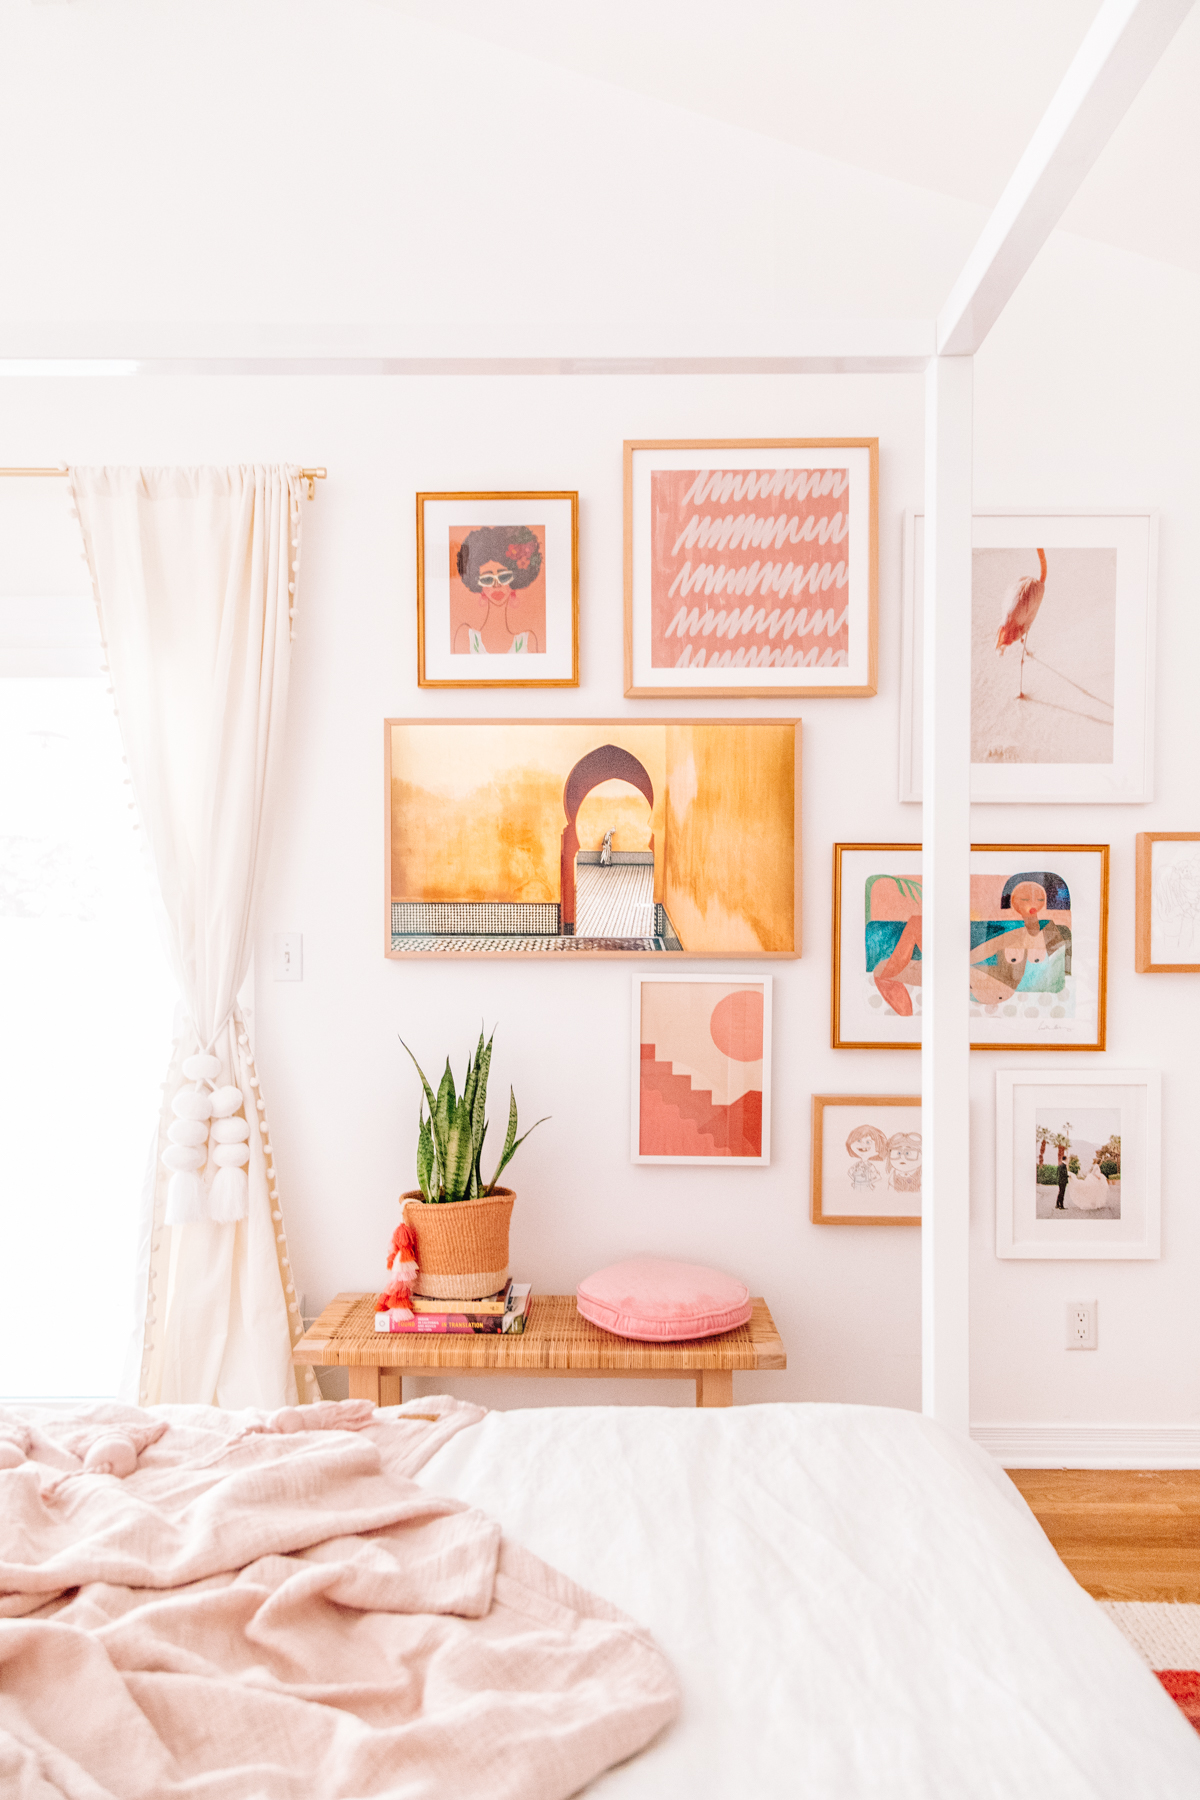 DIY FRAME MAKEOVER (A 45 MINUTE PROJECT!)